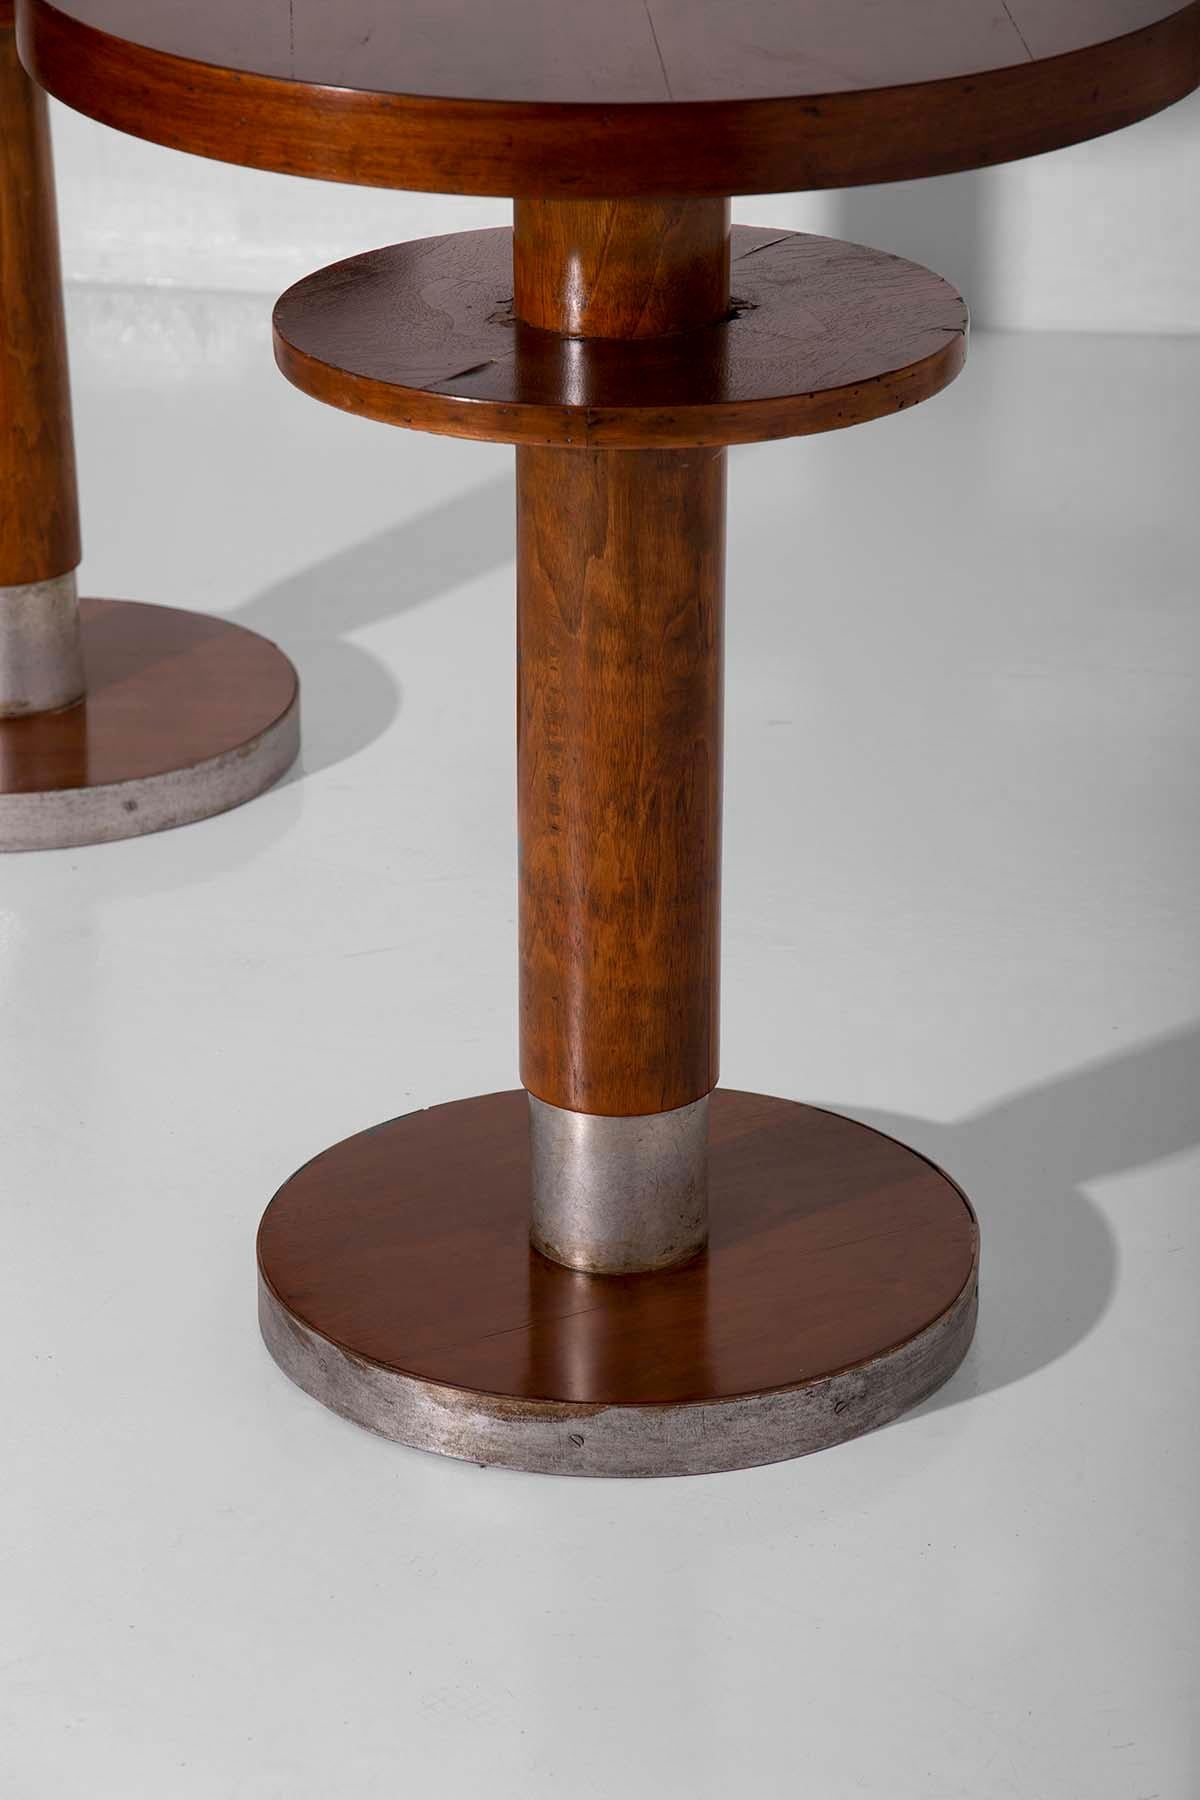 Italian Gio Ponti's ship's side table for the liner Bianca Mano, published  For Sale